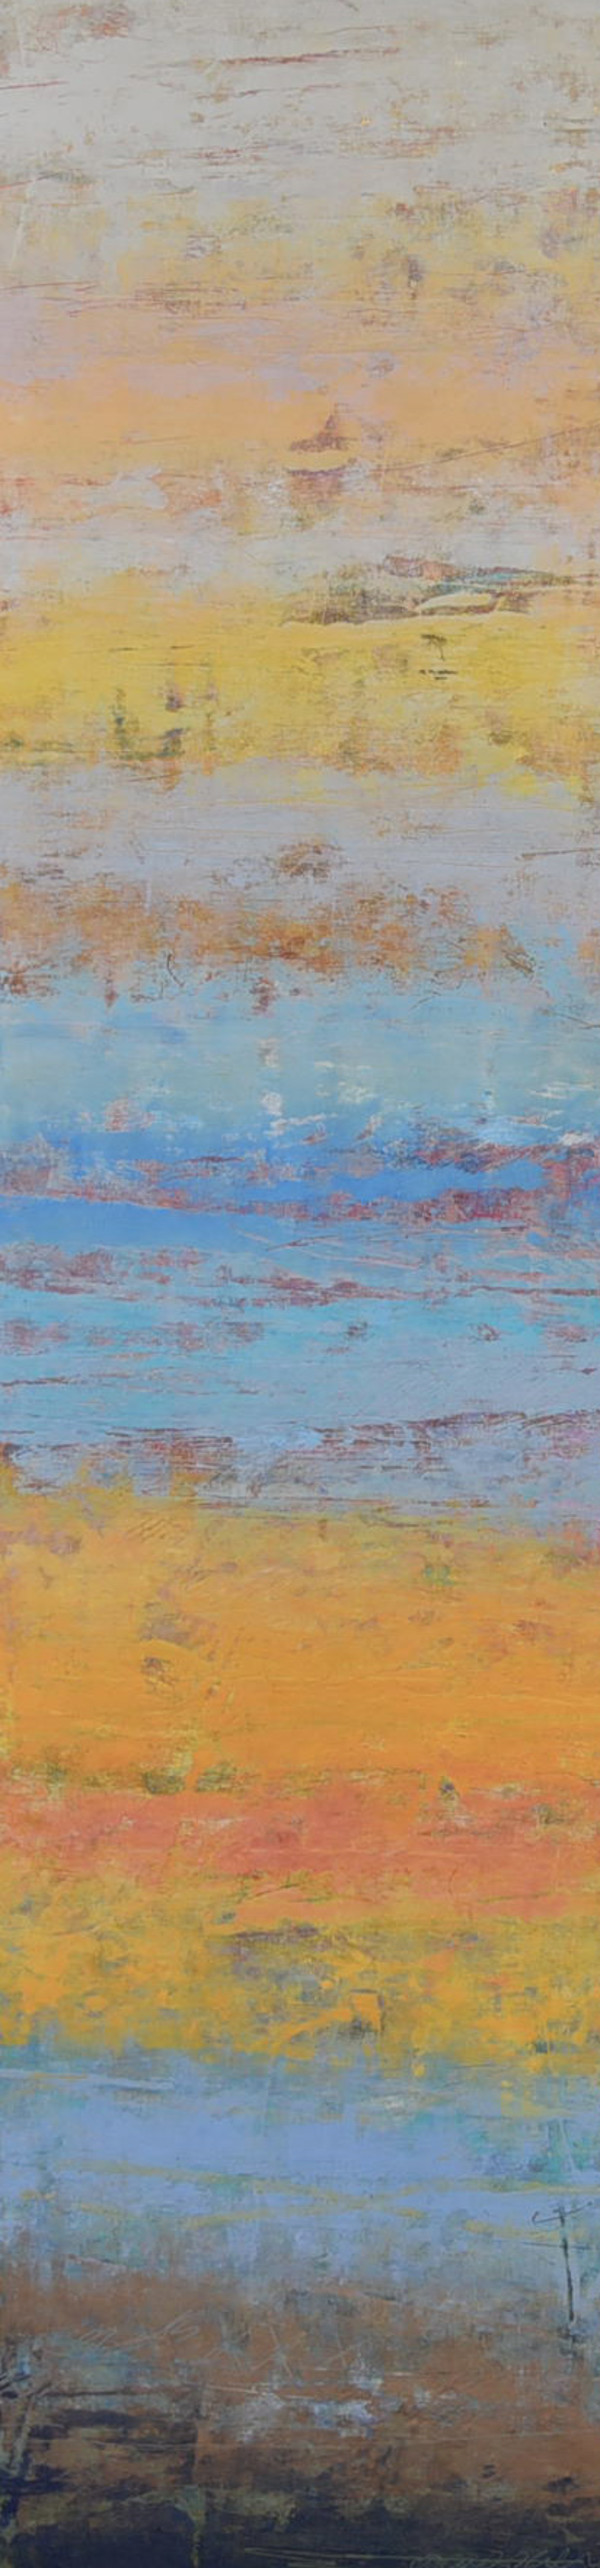 Taking My Time 2, 48x12" by Ginnie Cappaert